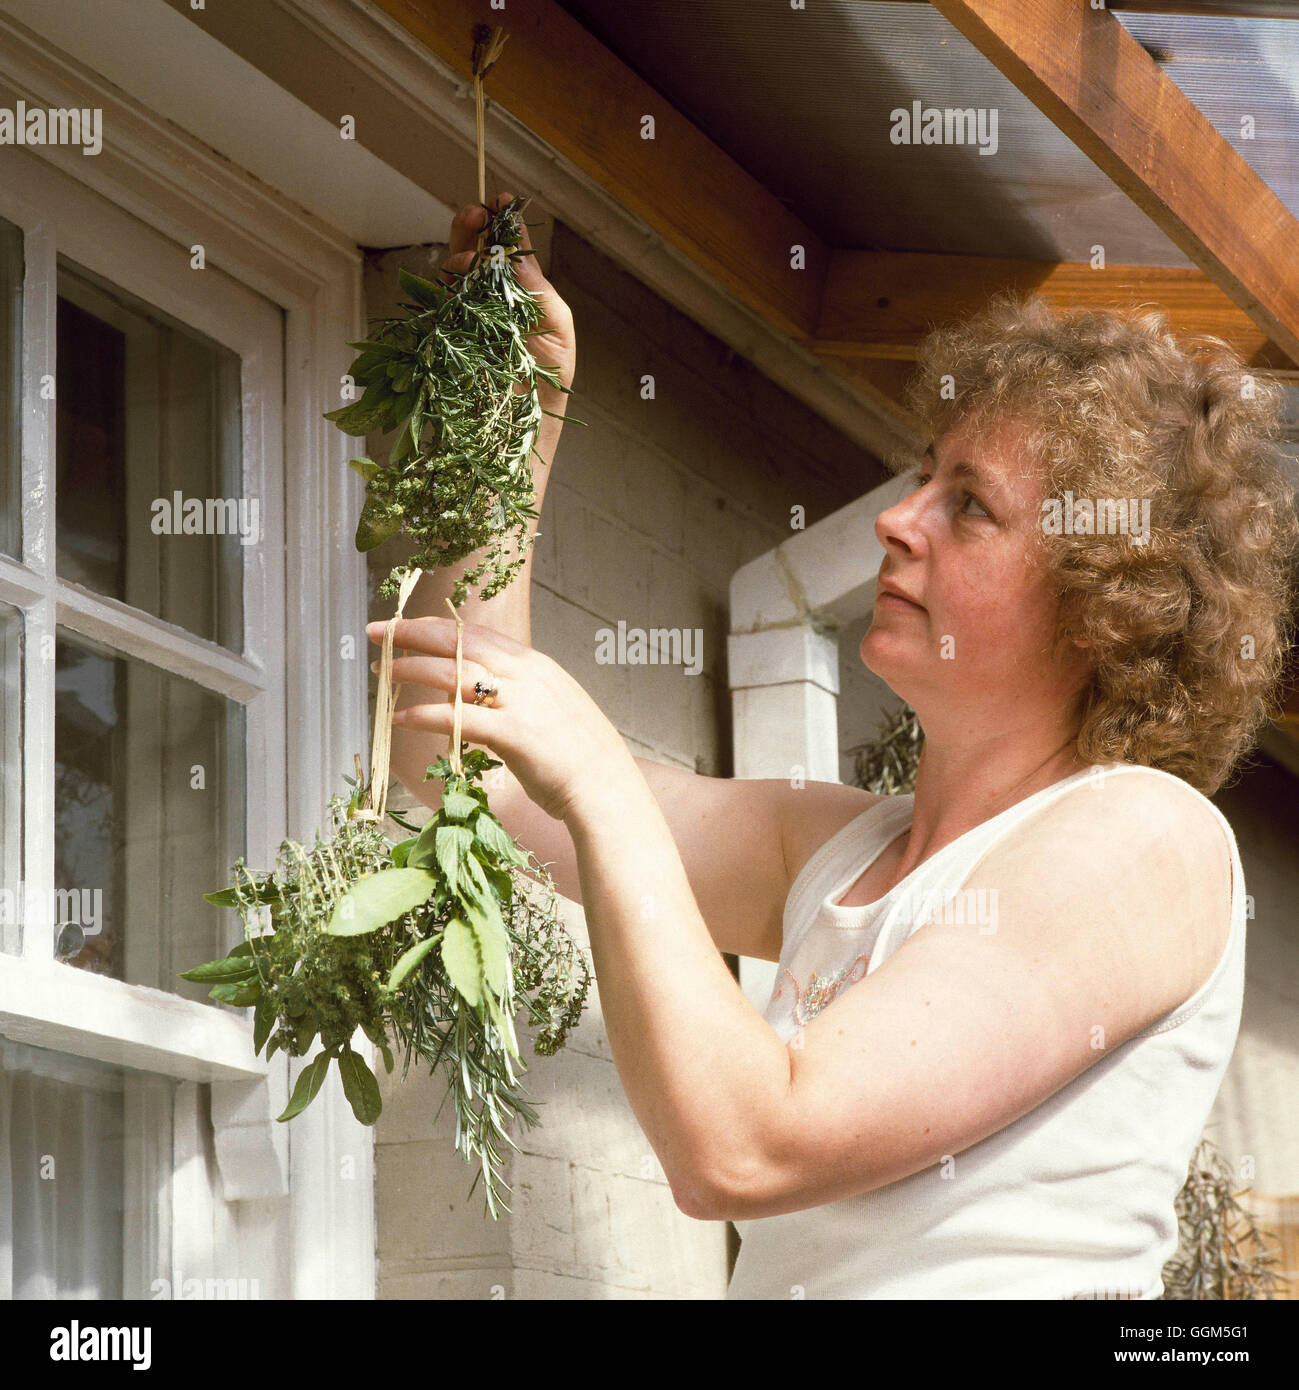 Drying Off - Herbs - by hanging them up in conservatory.   TAS044800 Stock Photo